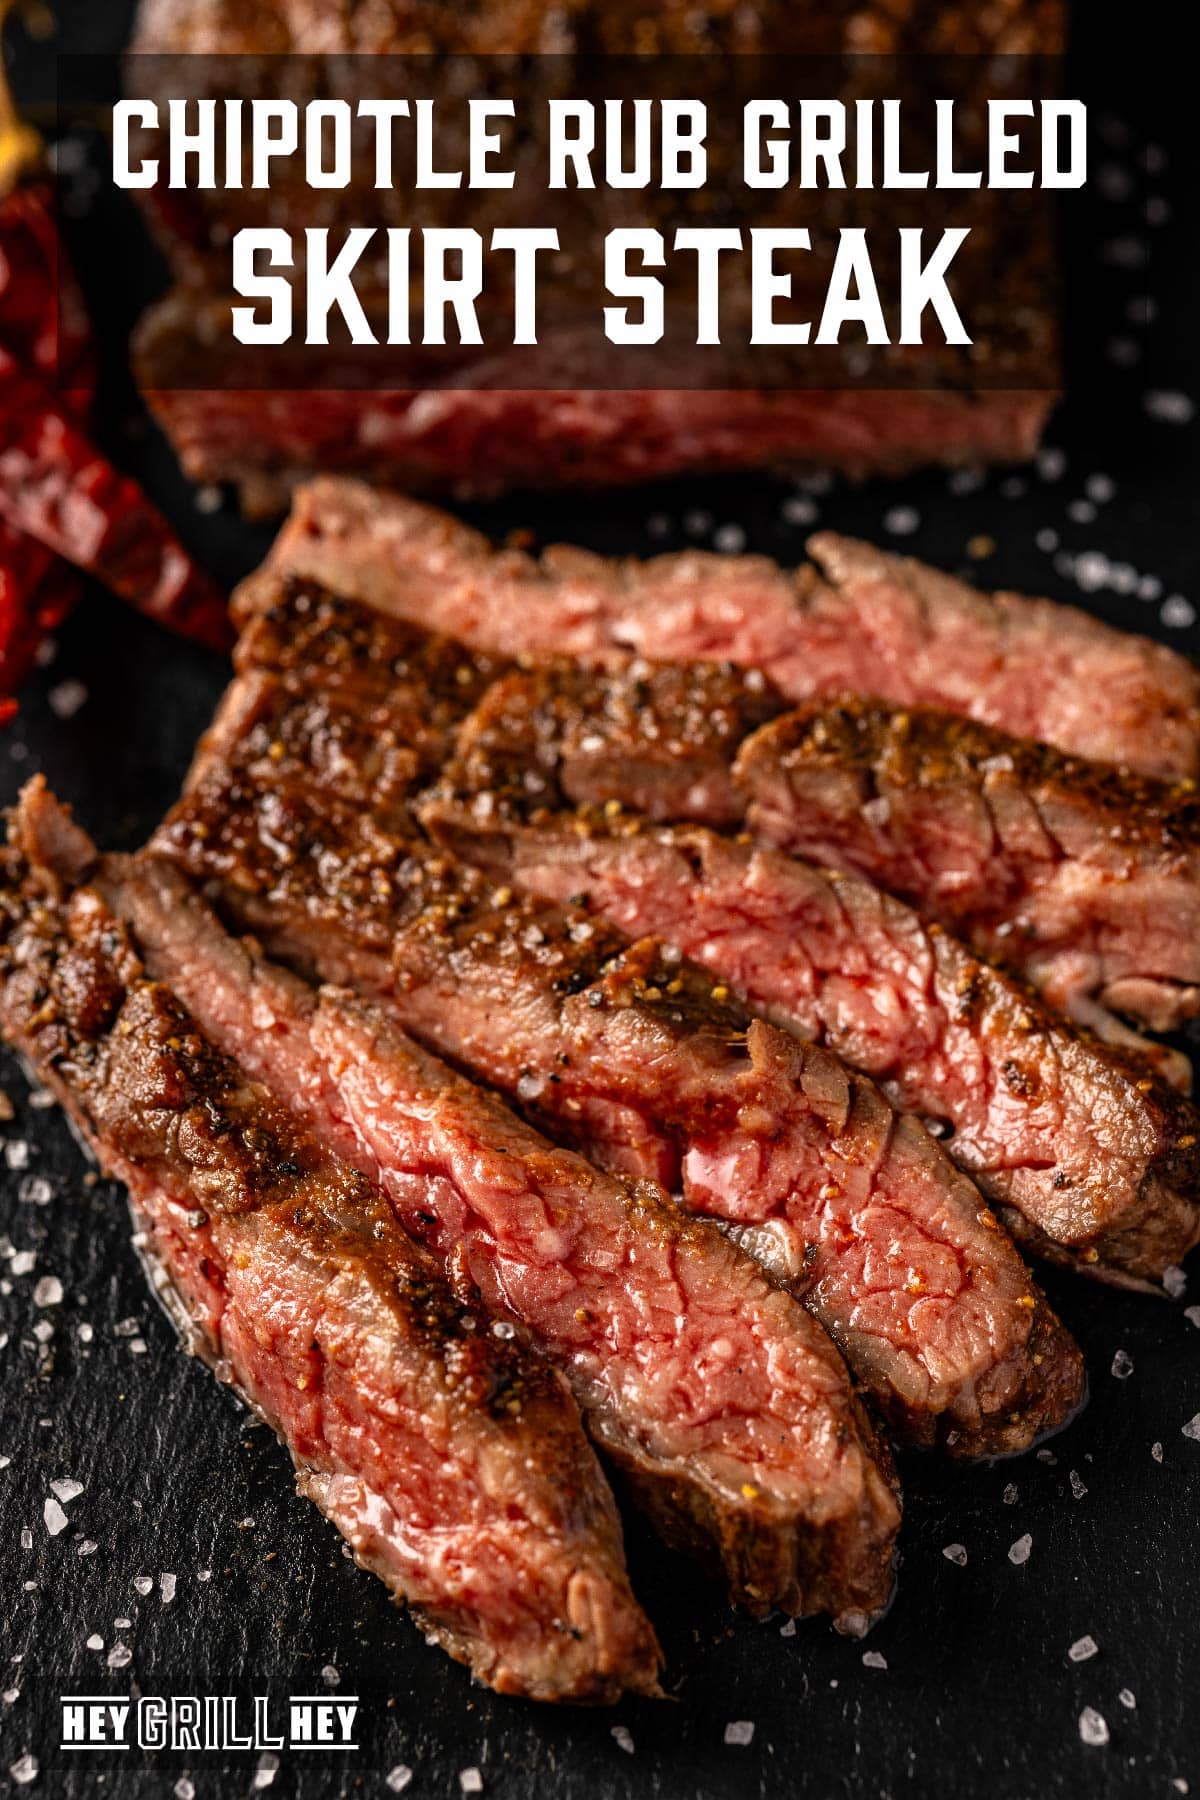 Sliced steak on cutting board. Text reads "Chipotle Rub Grilled Skirt Steak".